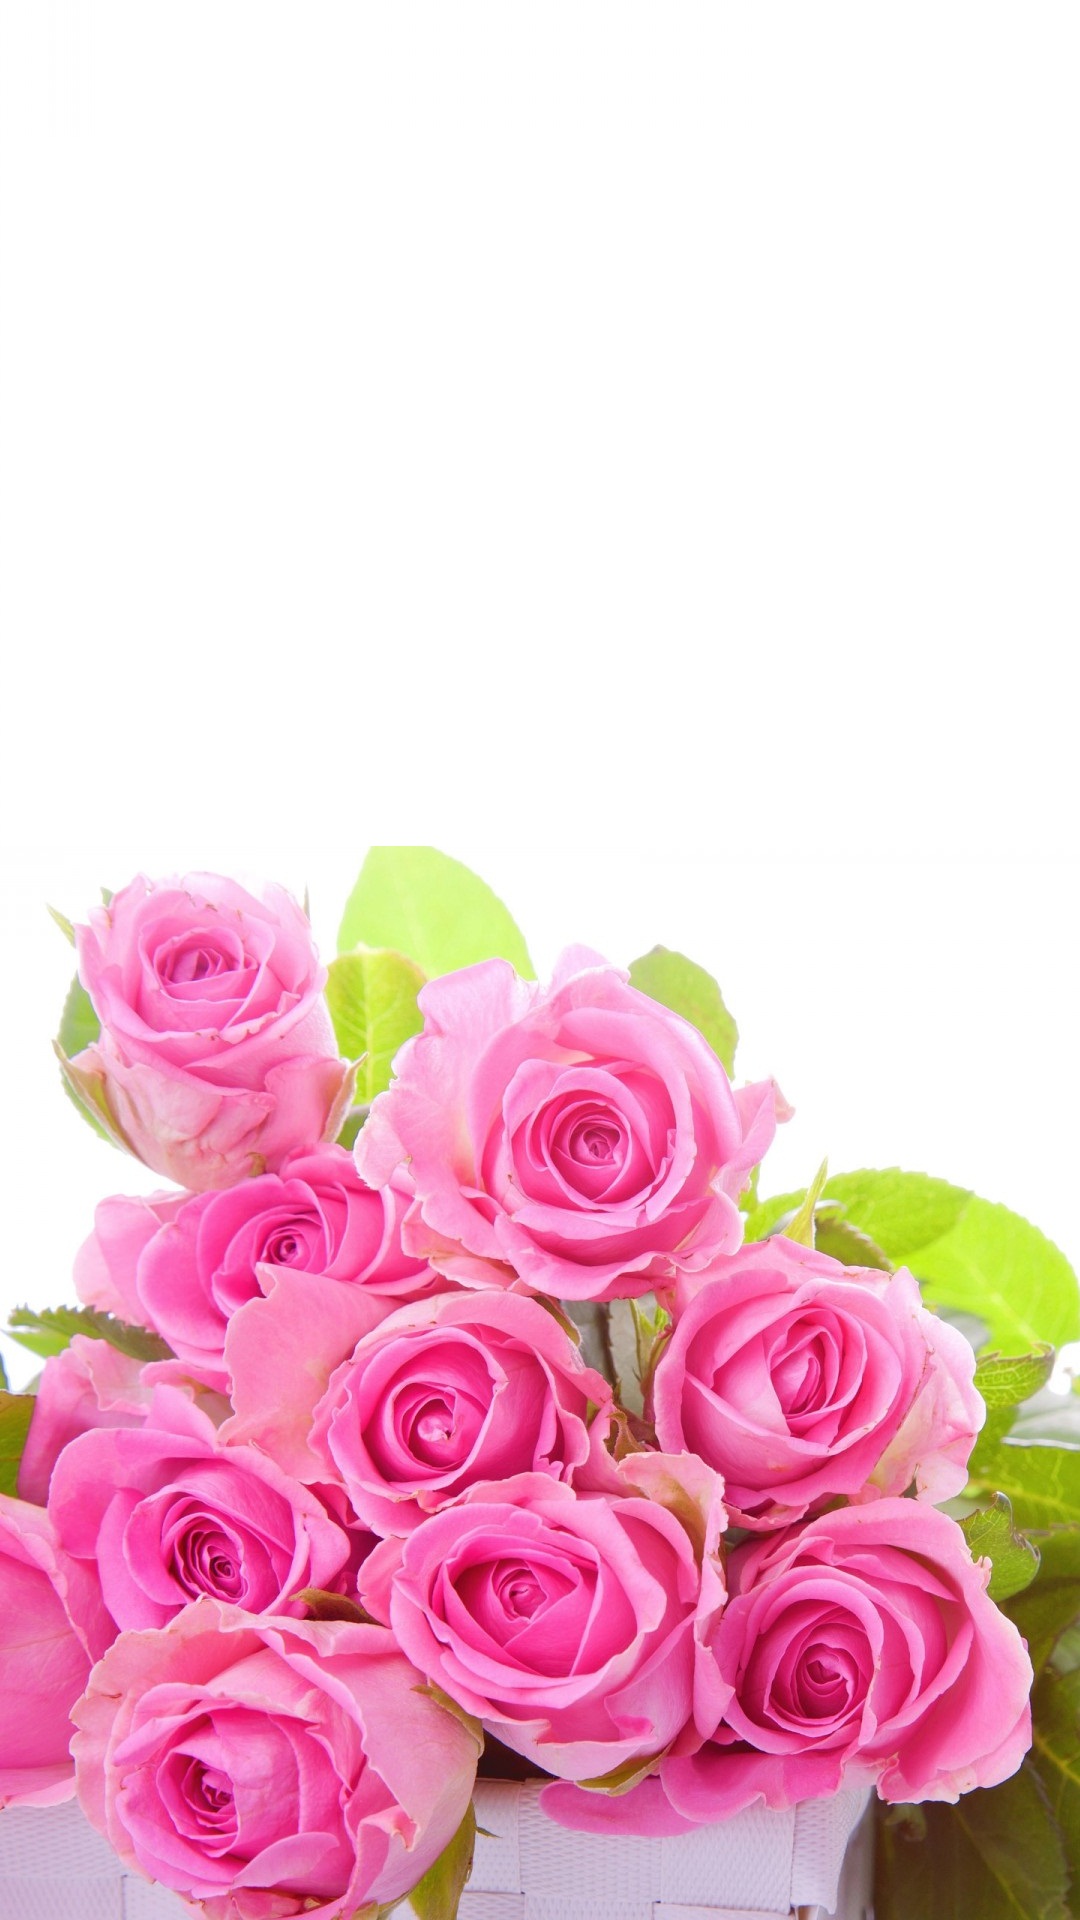 Pink roses Flower Wallpaper For iPhone resolution 1080x1920